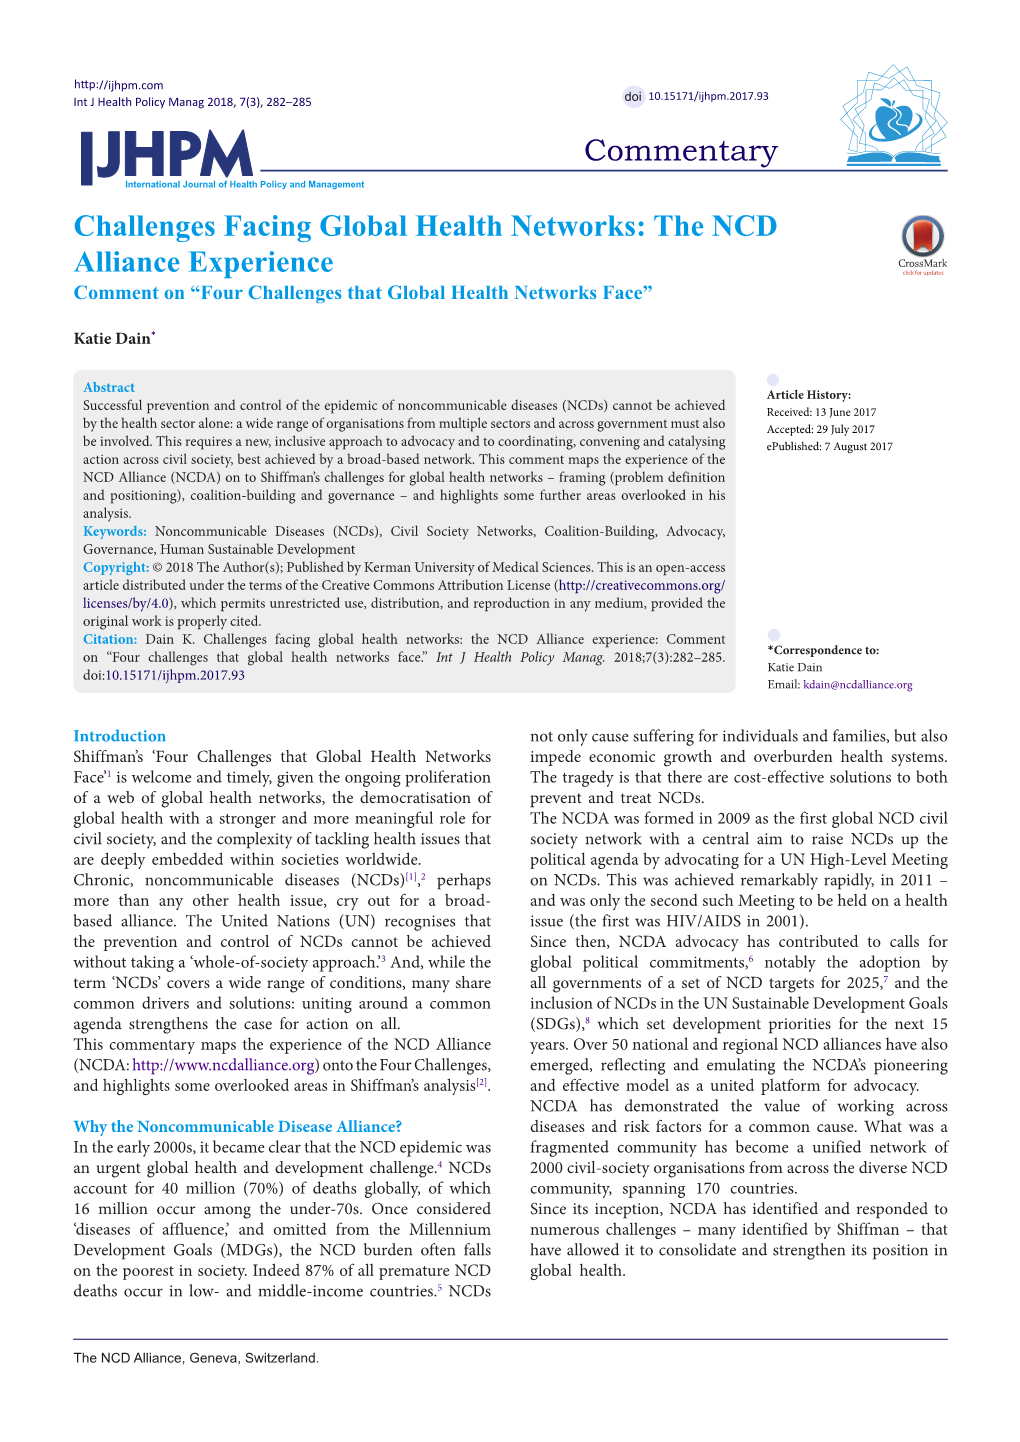 Challenges Facing Global Health Networks: the NCD Alliance Experience Comment on “Four Challenges That Global Health Networks Face”